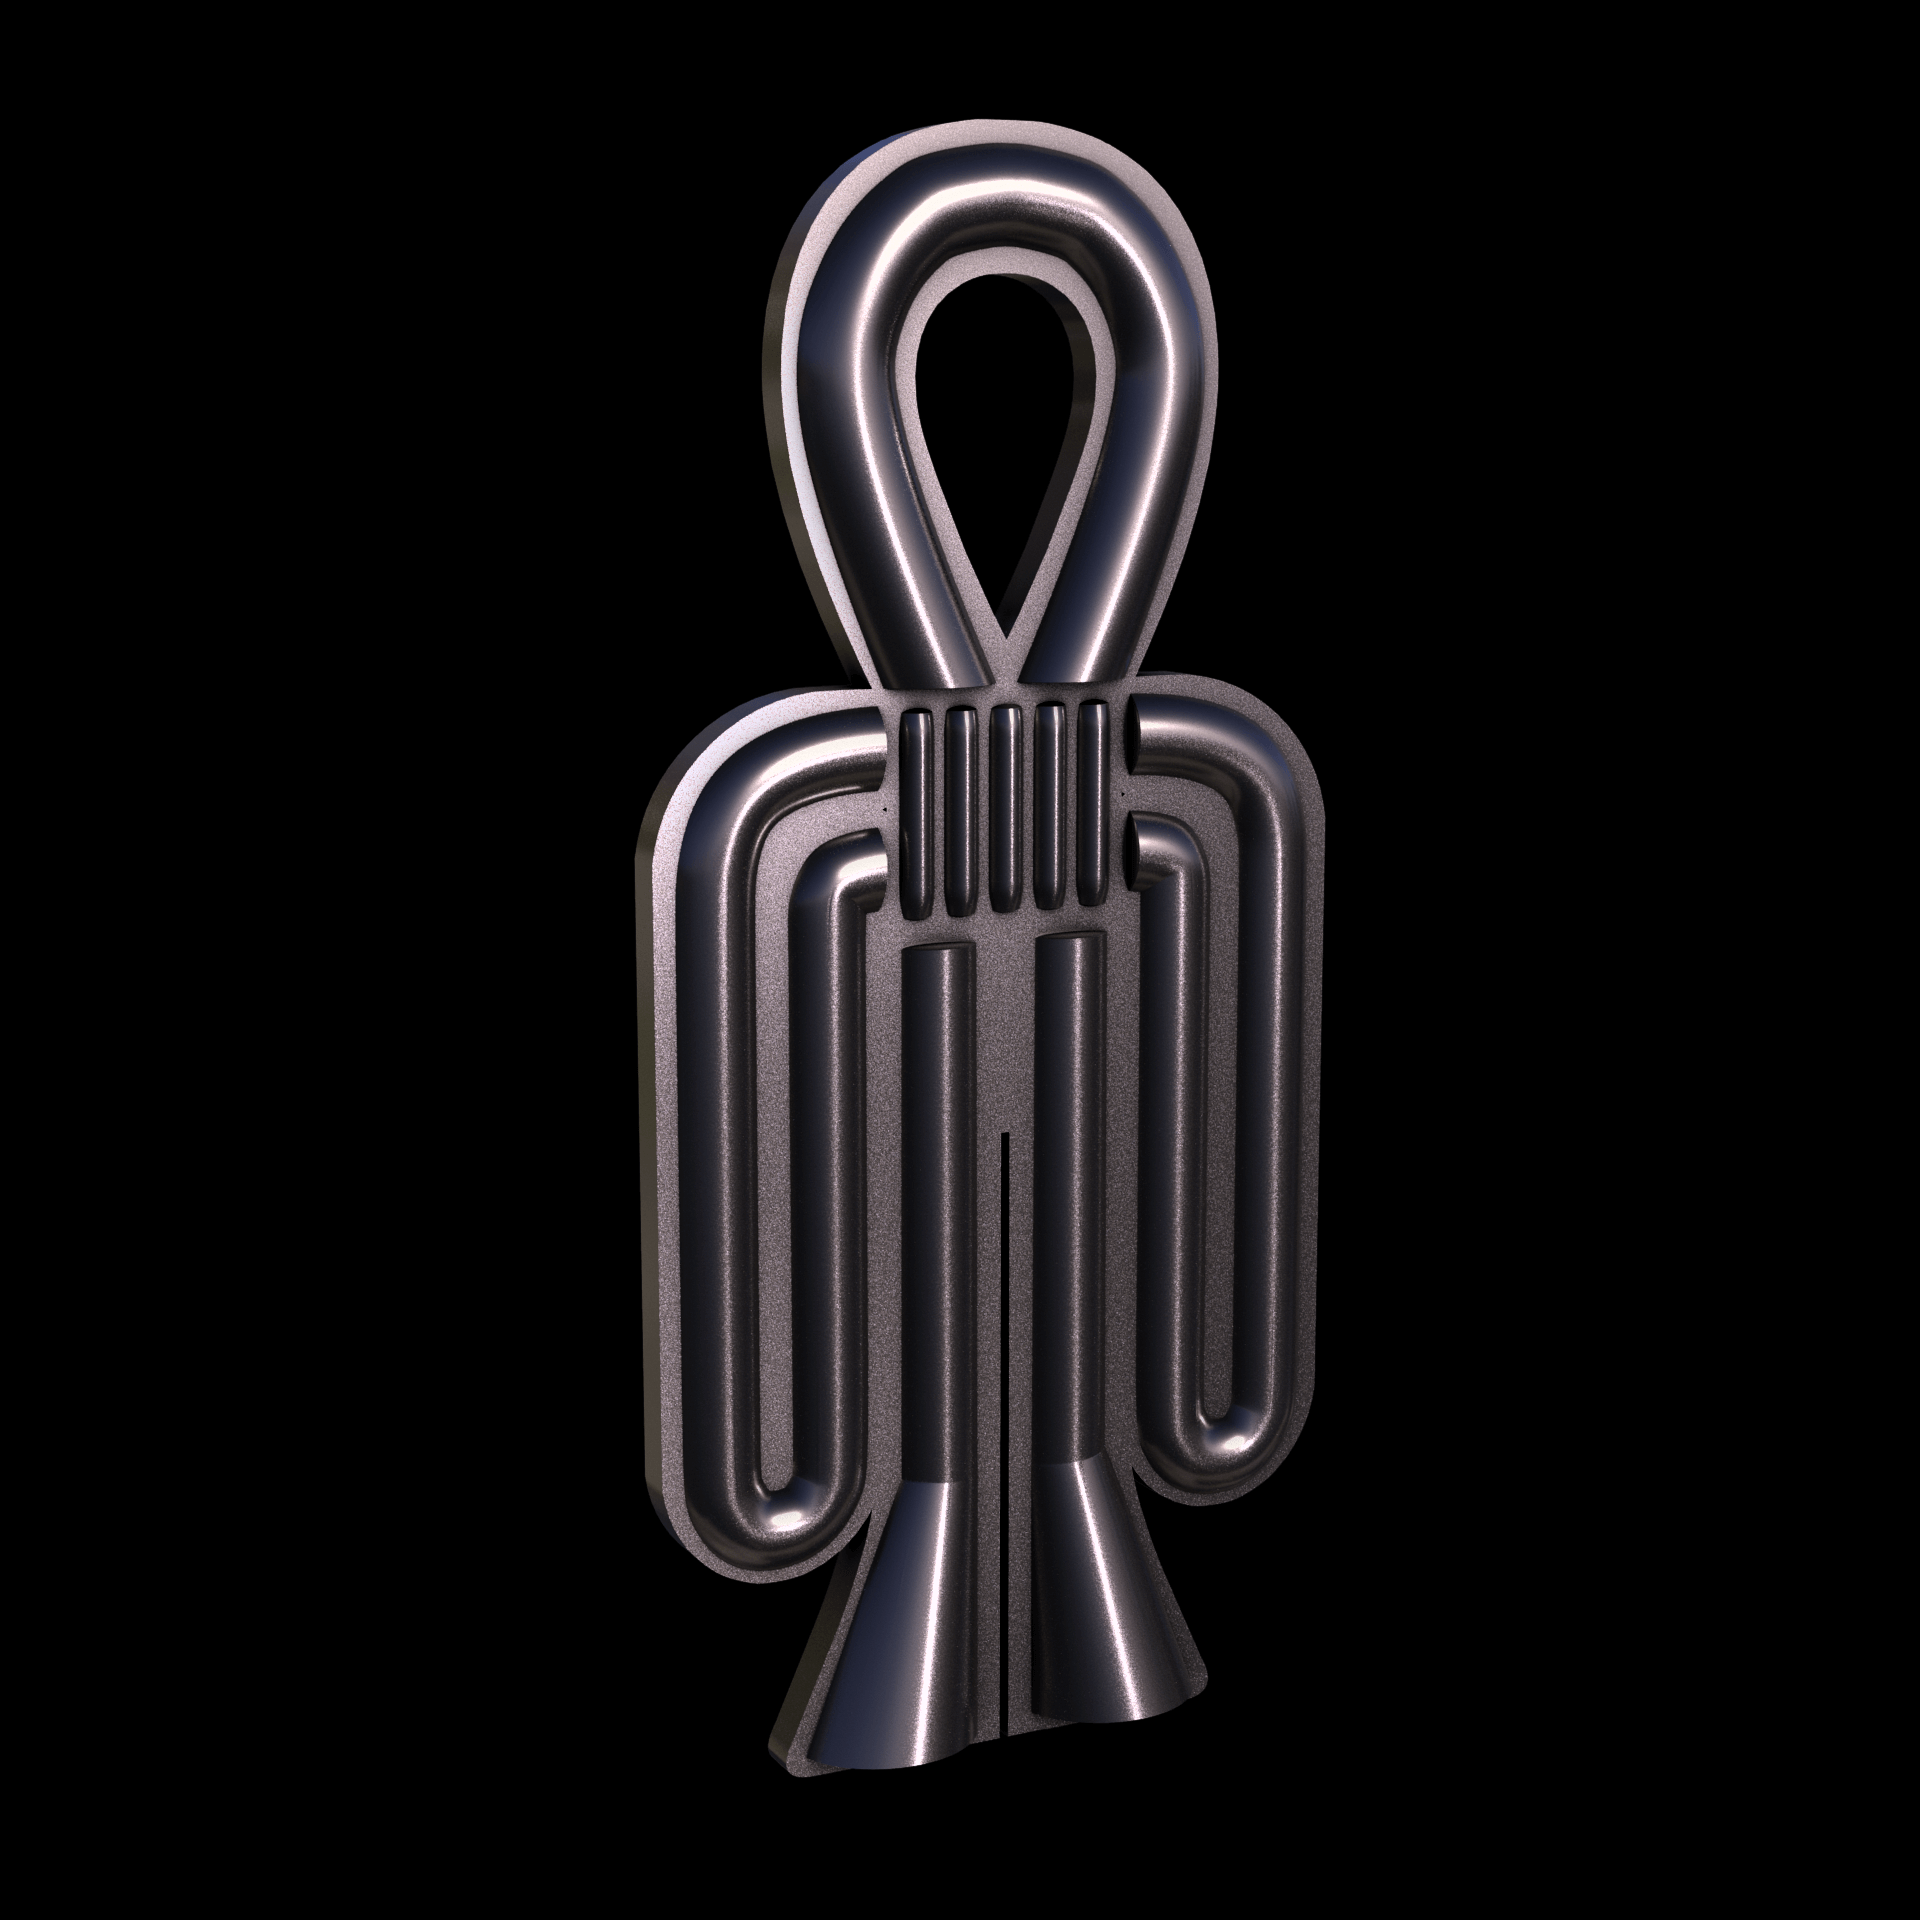 Bronze infused 420 stainless steel, manufactured using 3D printing, with visible print lines.